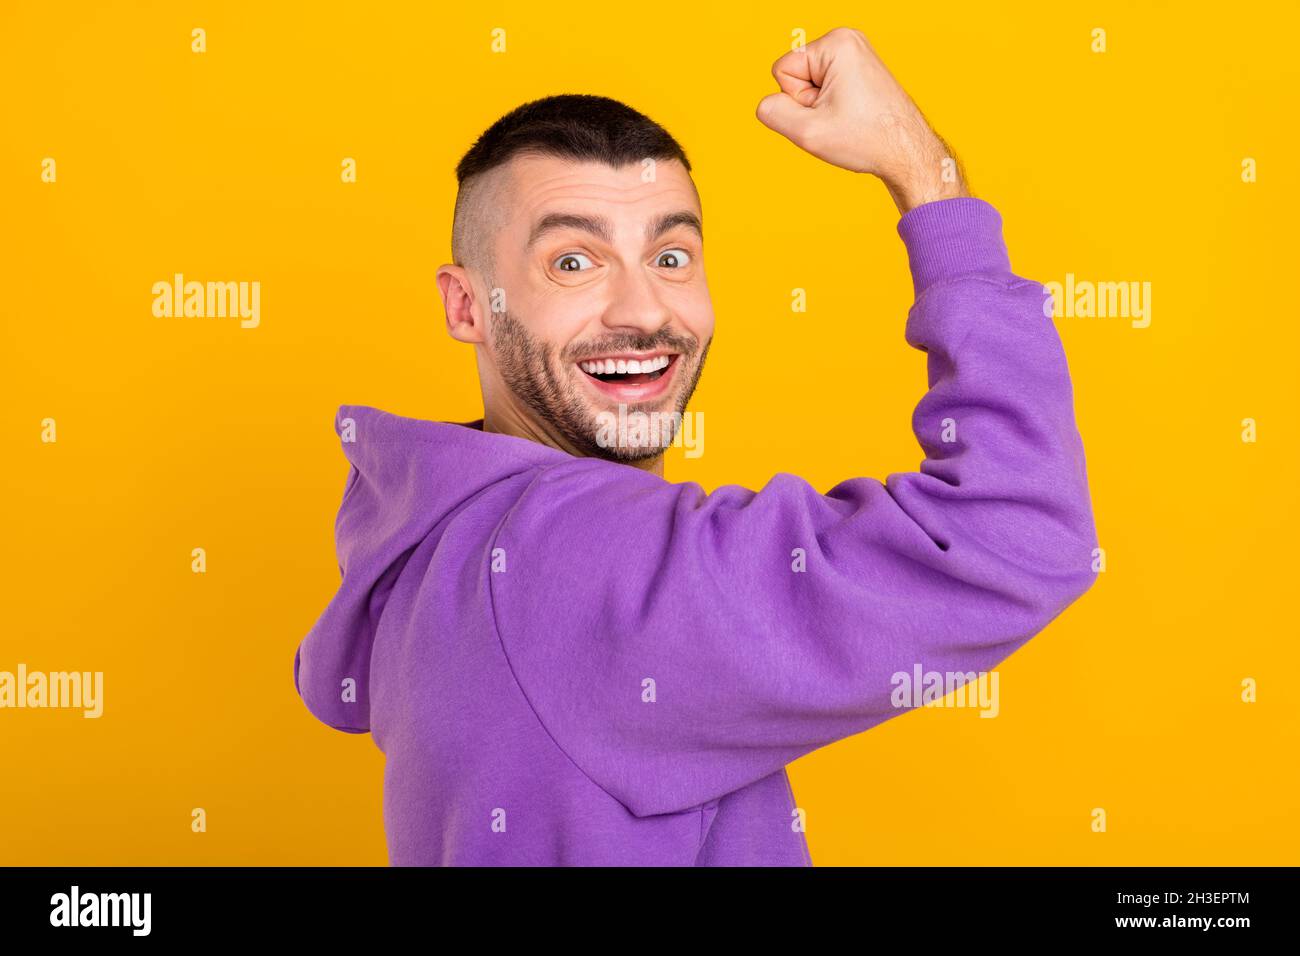 Photo portrait young man wearing purple hoody showing strong biceps isolated vivid yellow color background Stock Photo